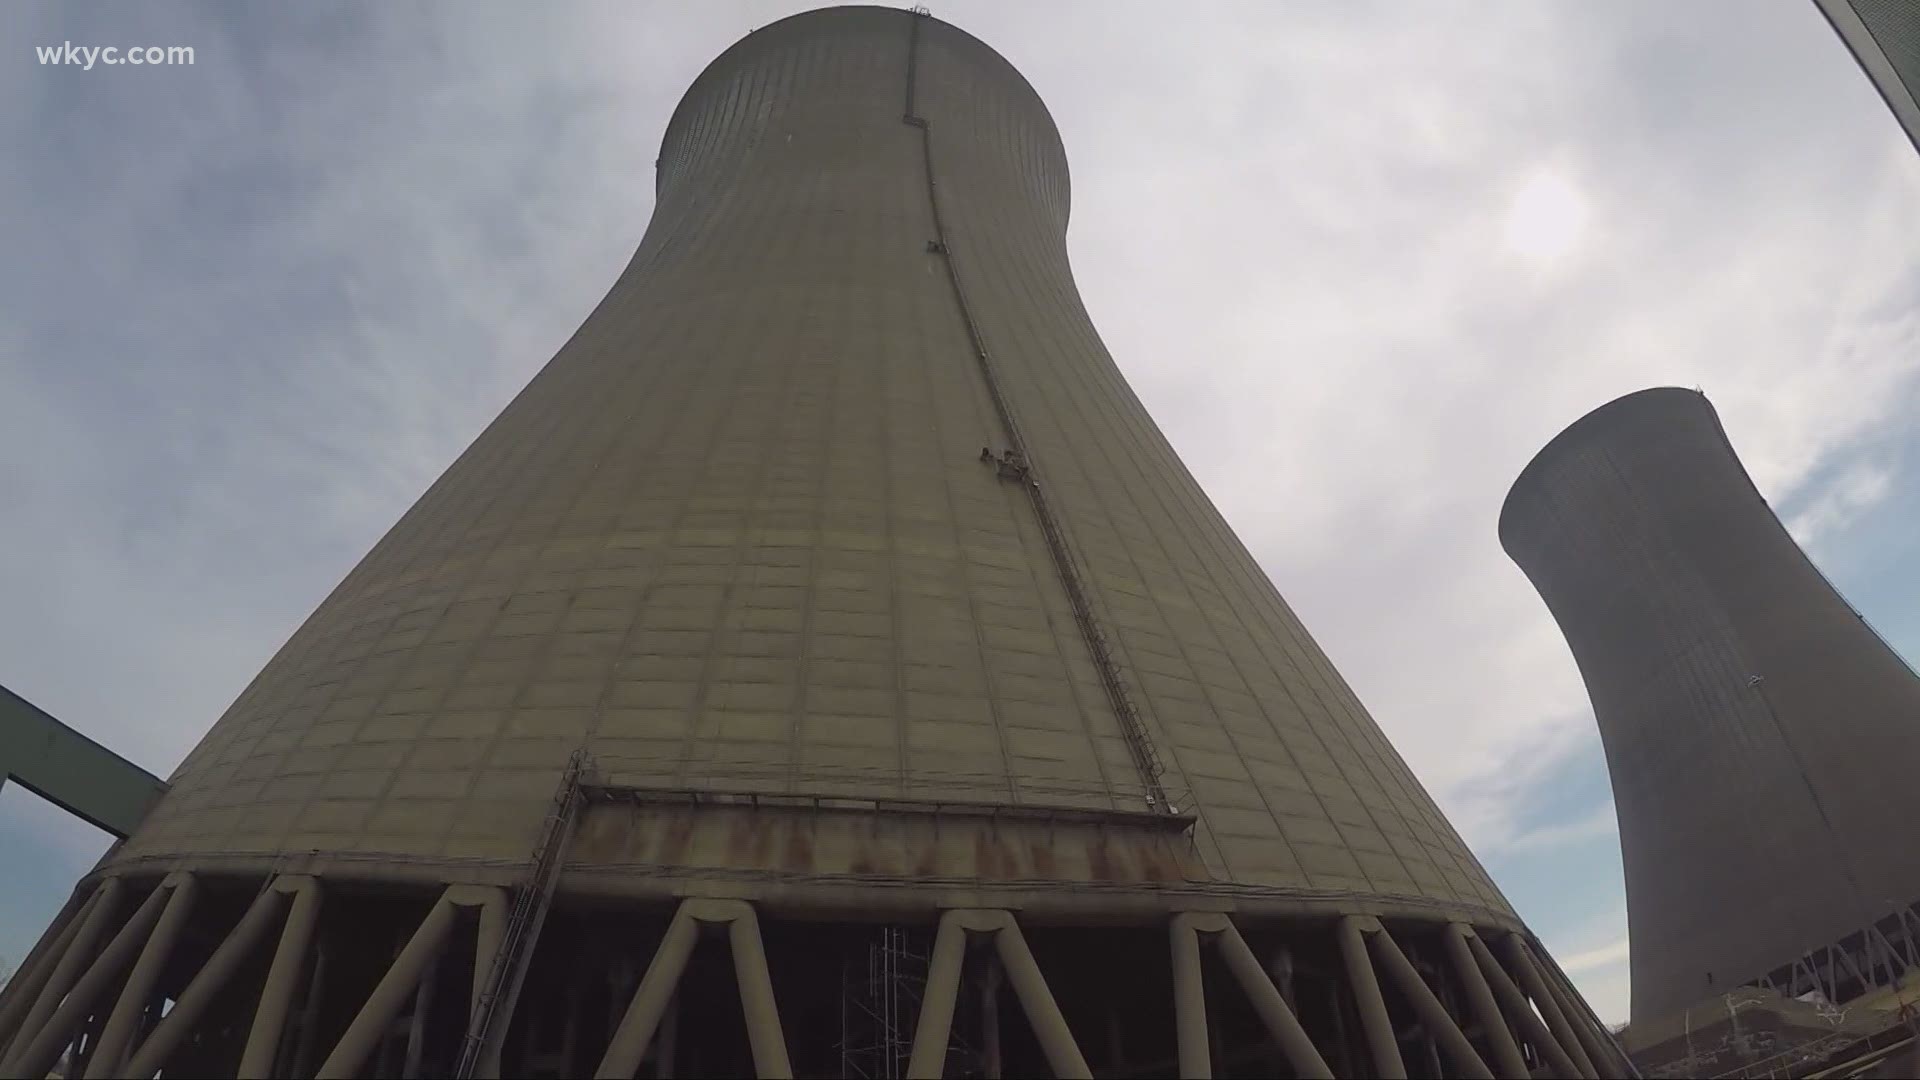 House Bill 6 is the $1 billion nuclear plant bailout that we learned back in July was linked to Ohio's largest bribery scheme ever. 3News Rachel Polansky reports